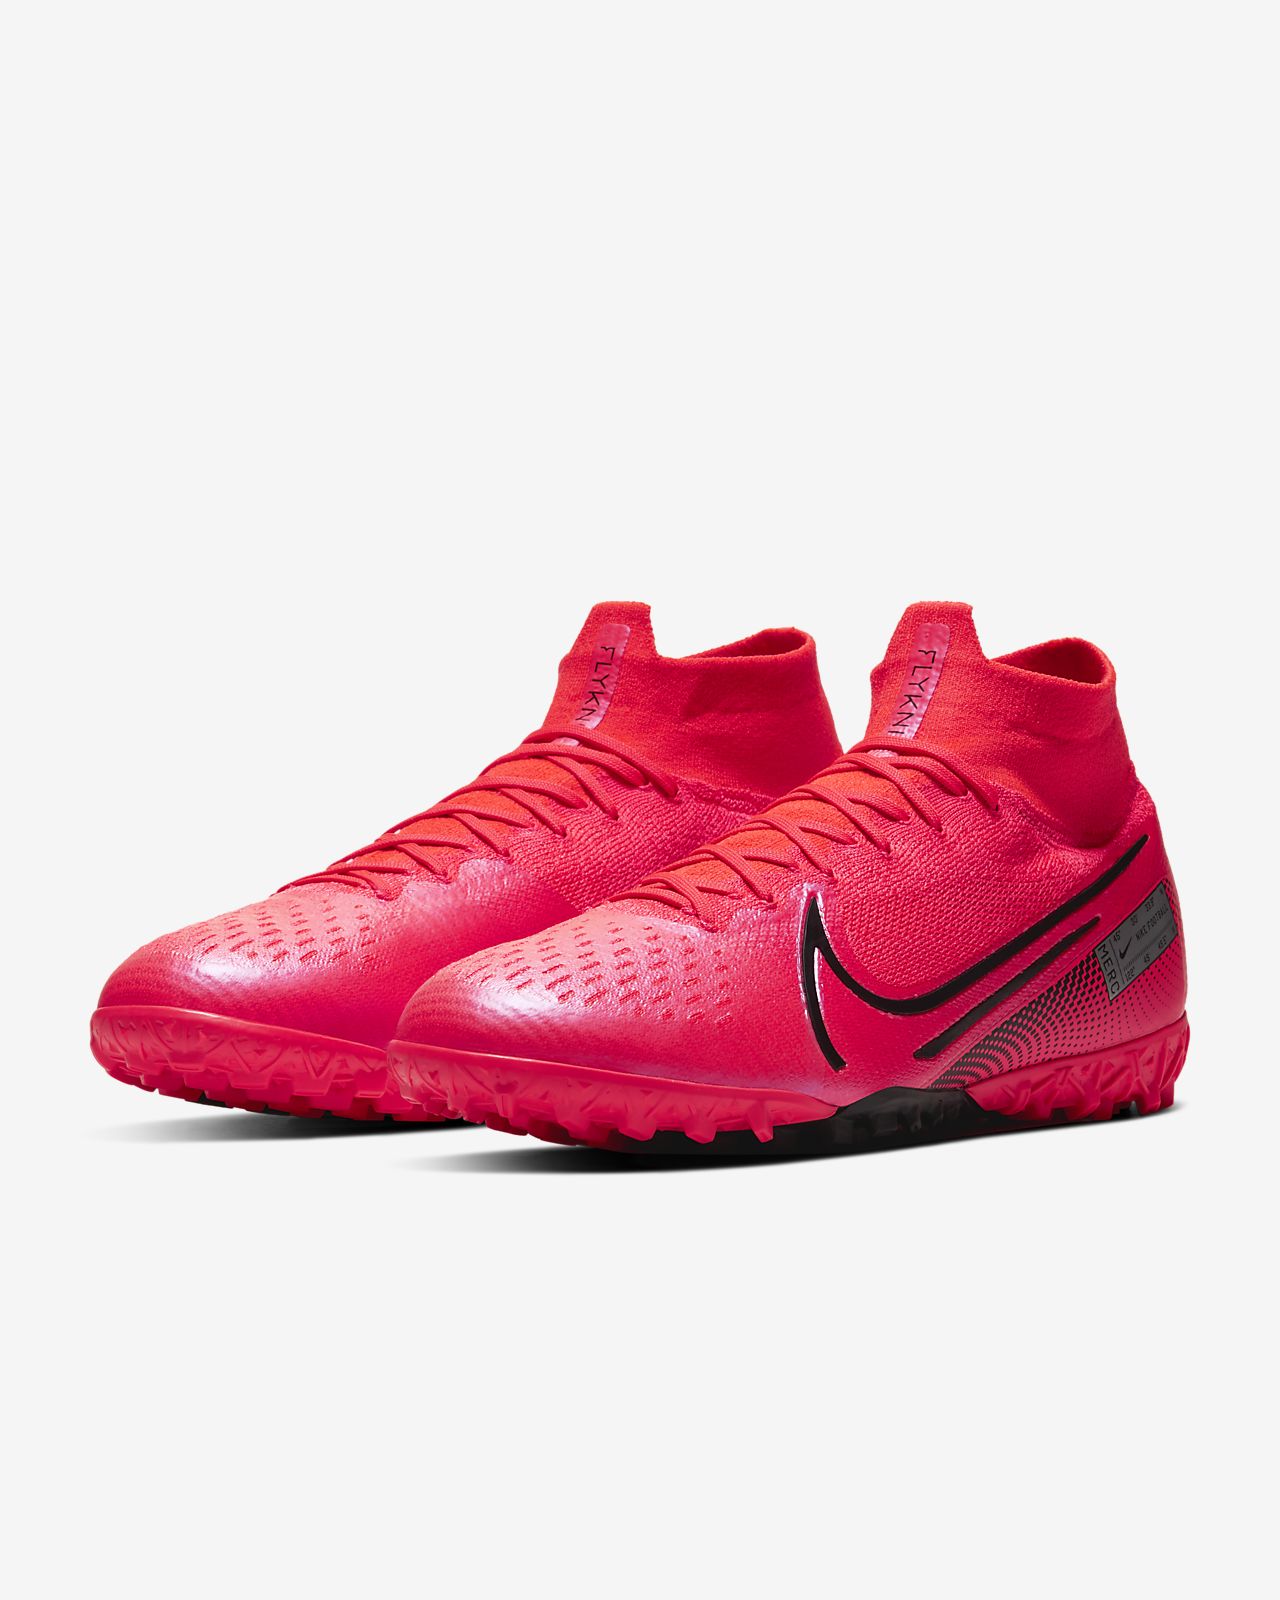 Fish boots Nike Mercurial Superfly 7 Elite FG 005 Price.